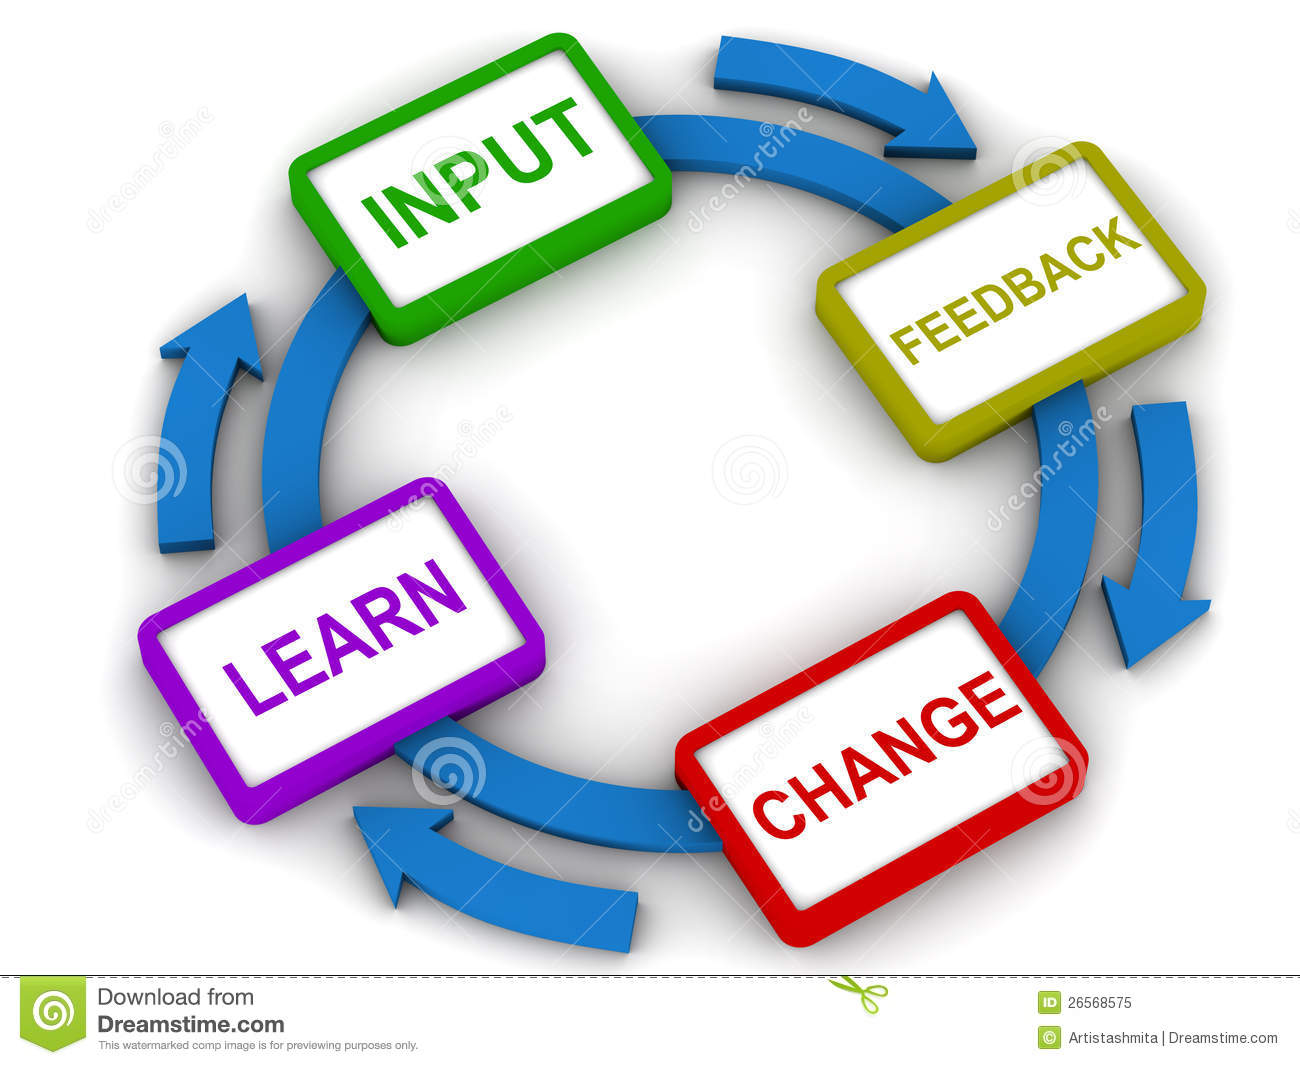 Process Improvement Showing 4 Main Stages Of Input Feedback Change And